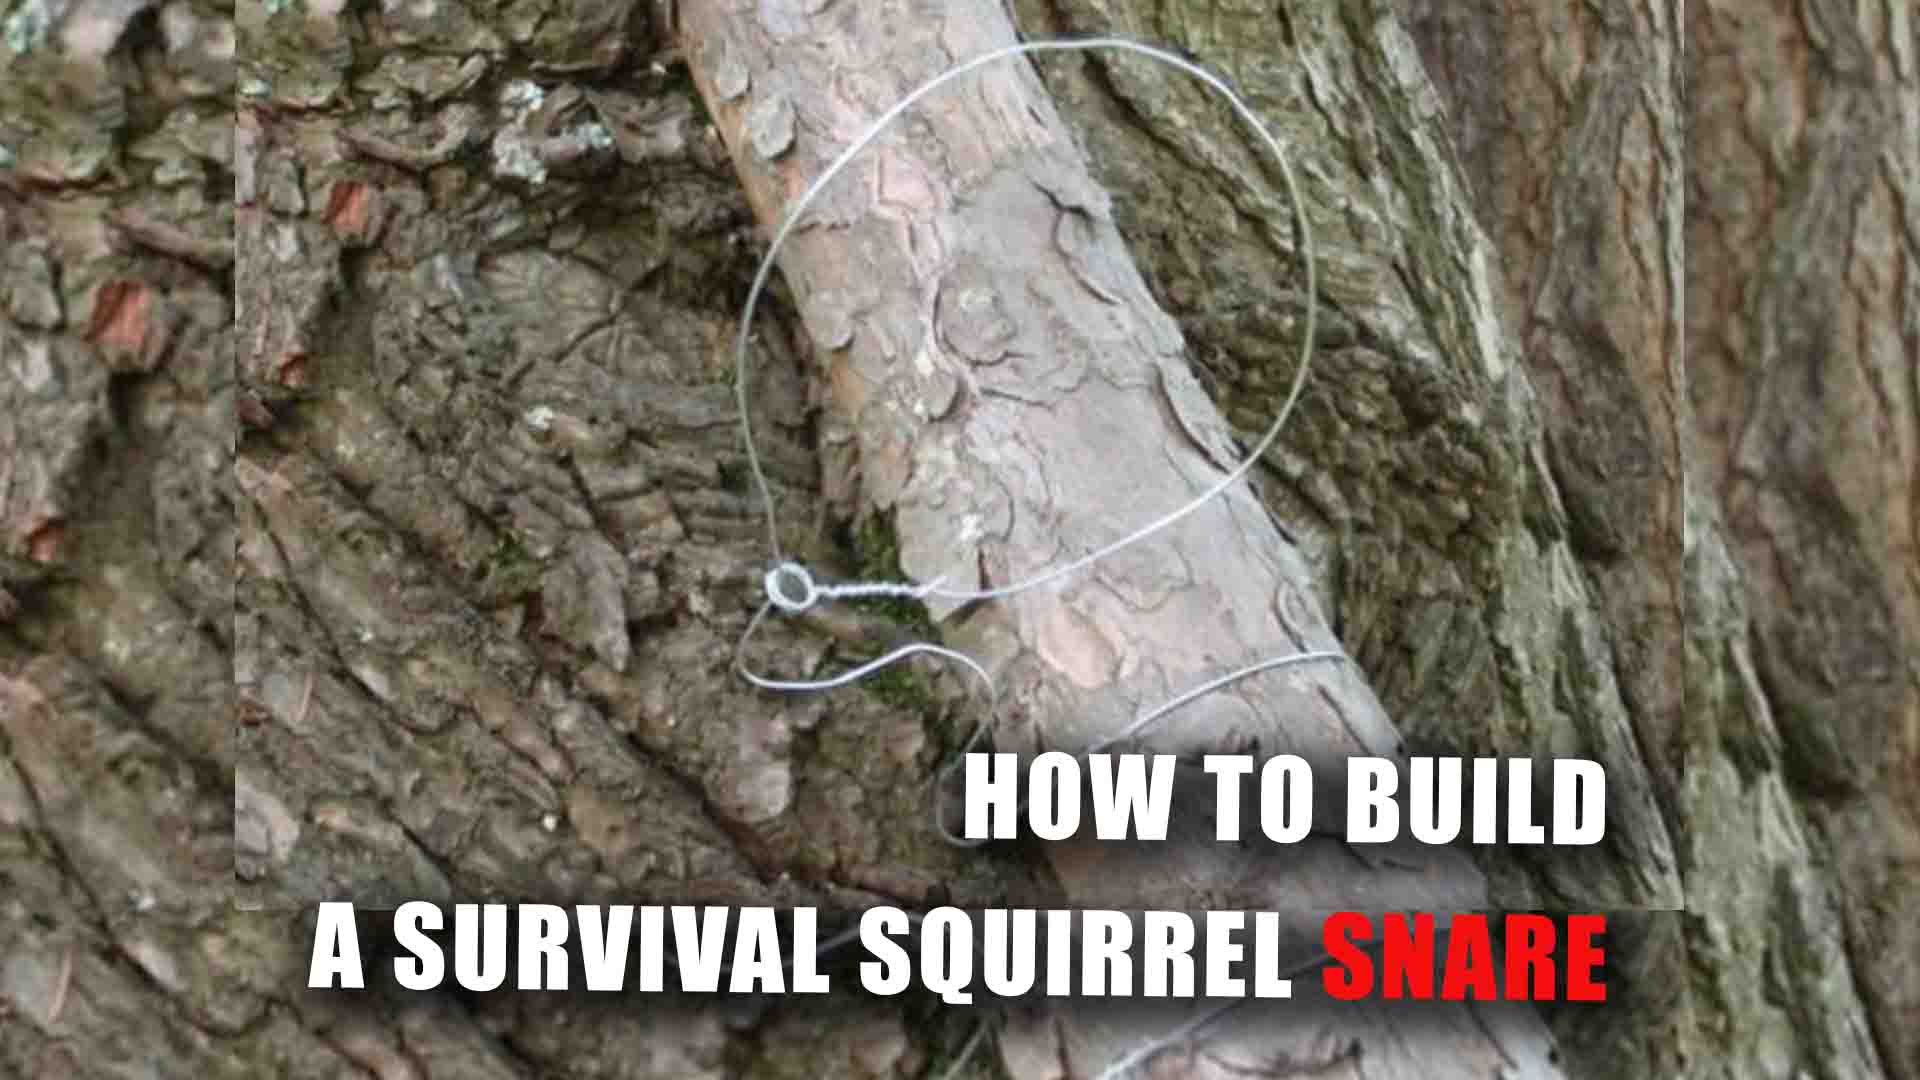 How to Build a Survival Squirrel Snare